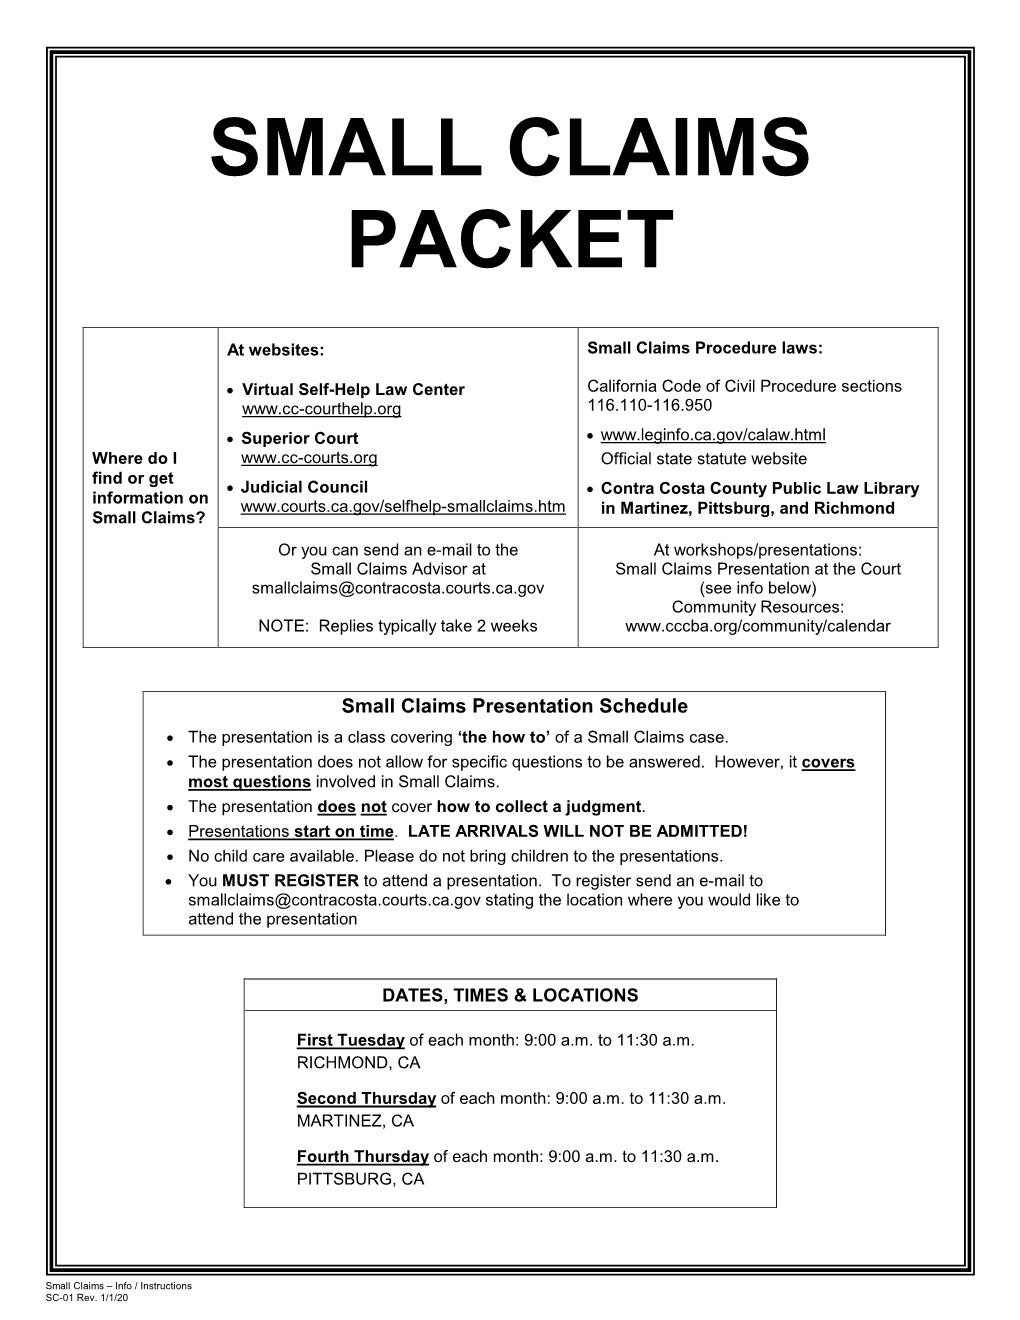 Small Claims Packet